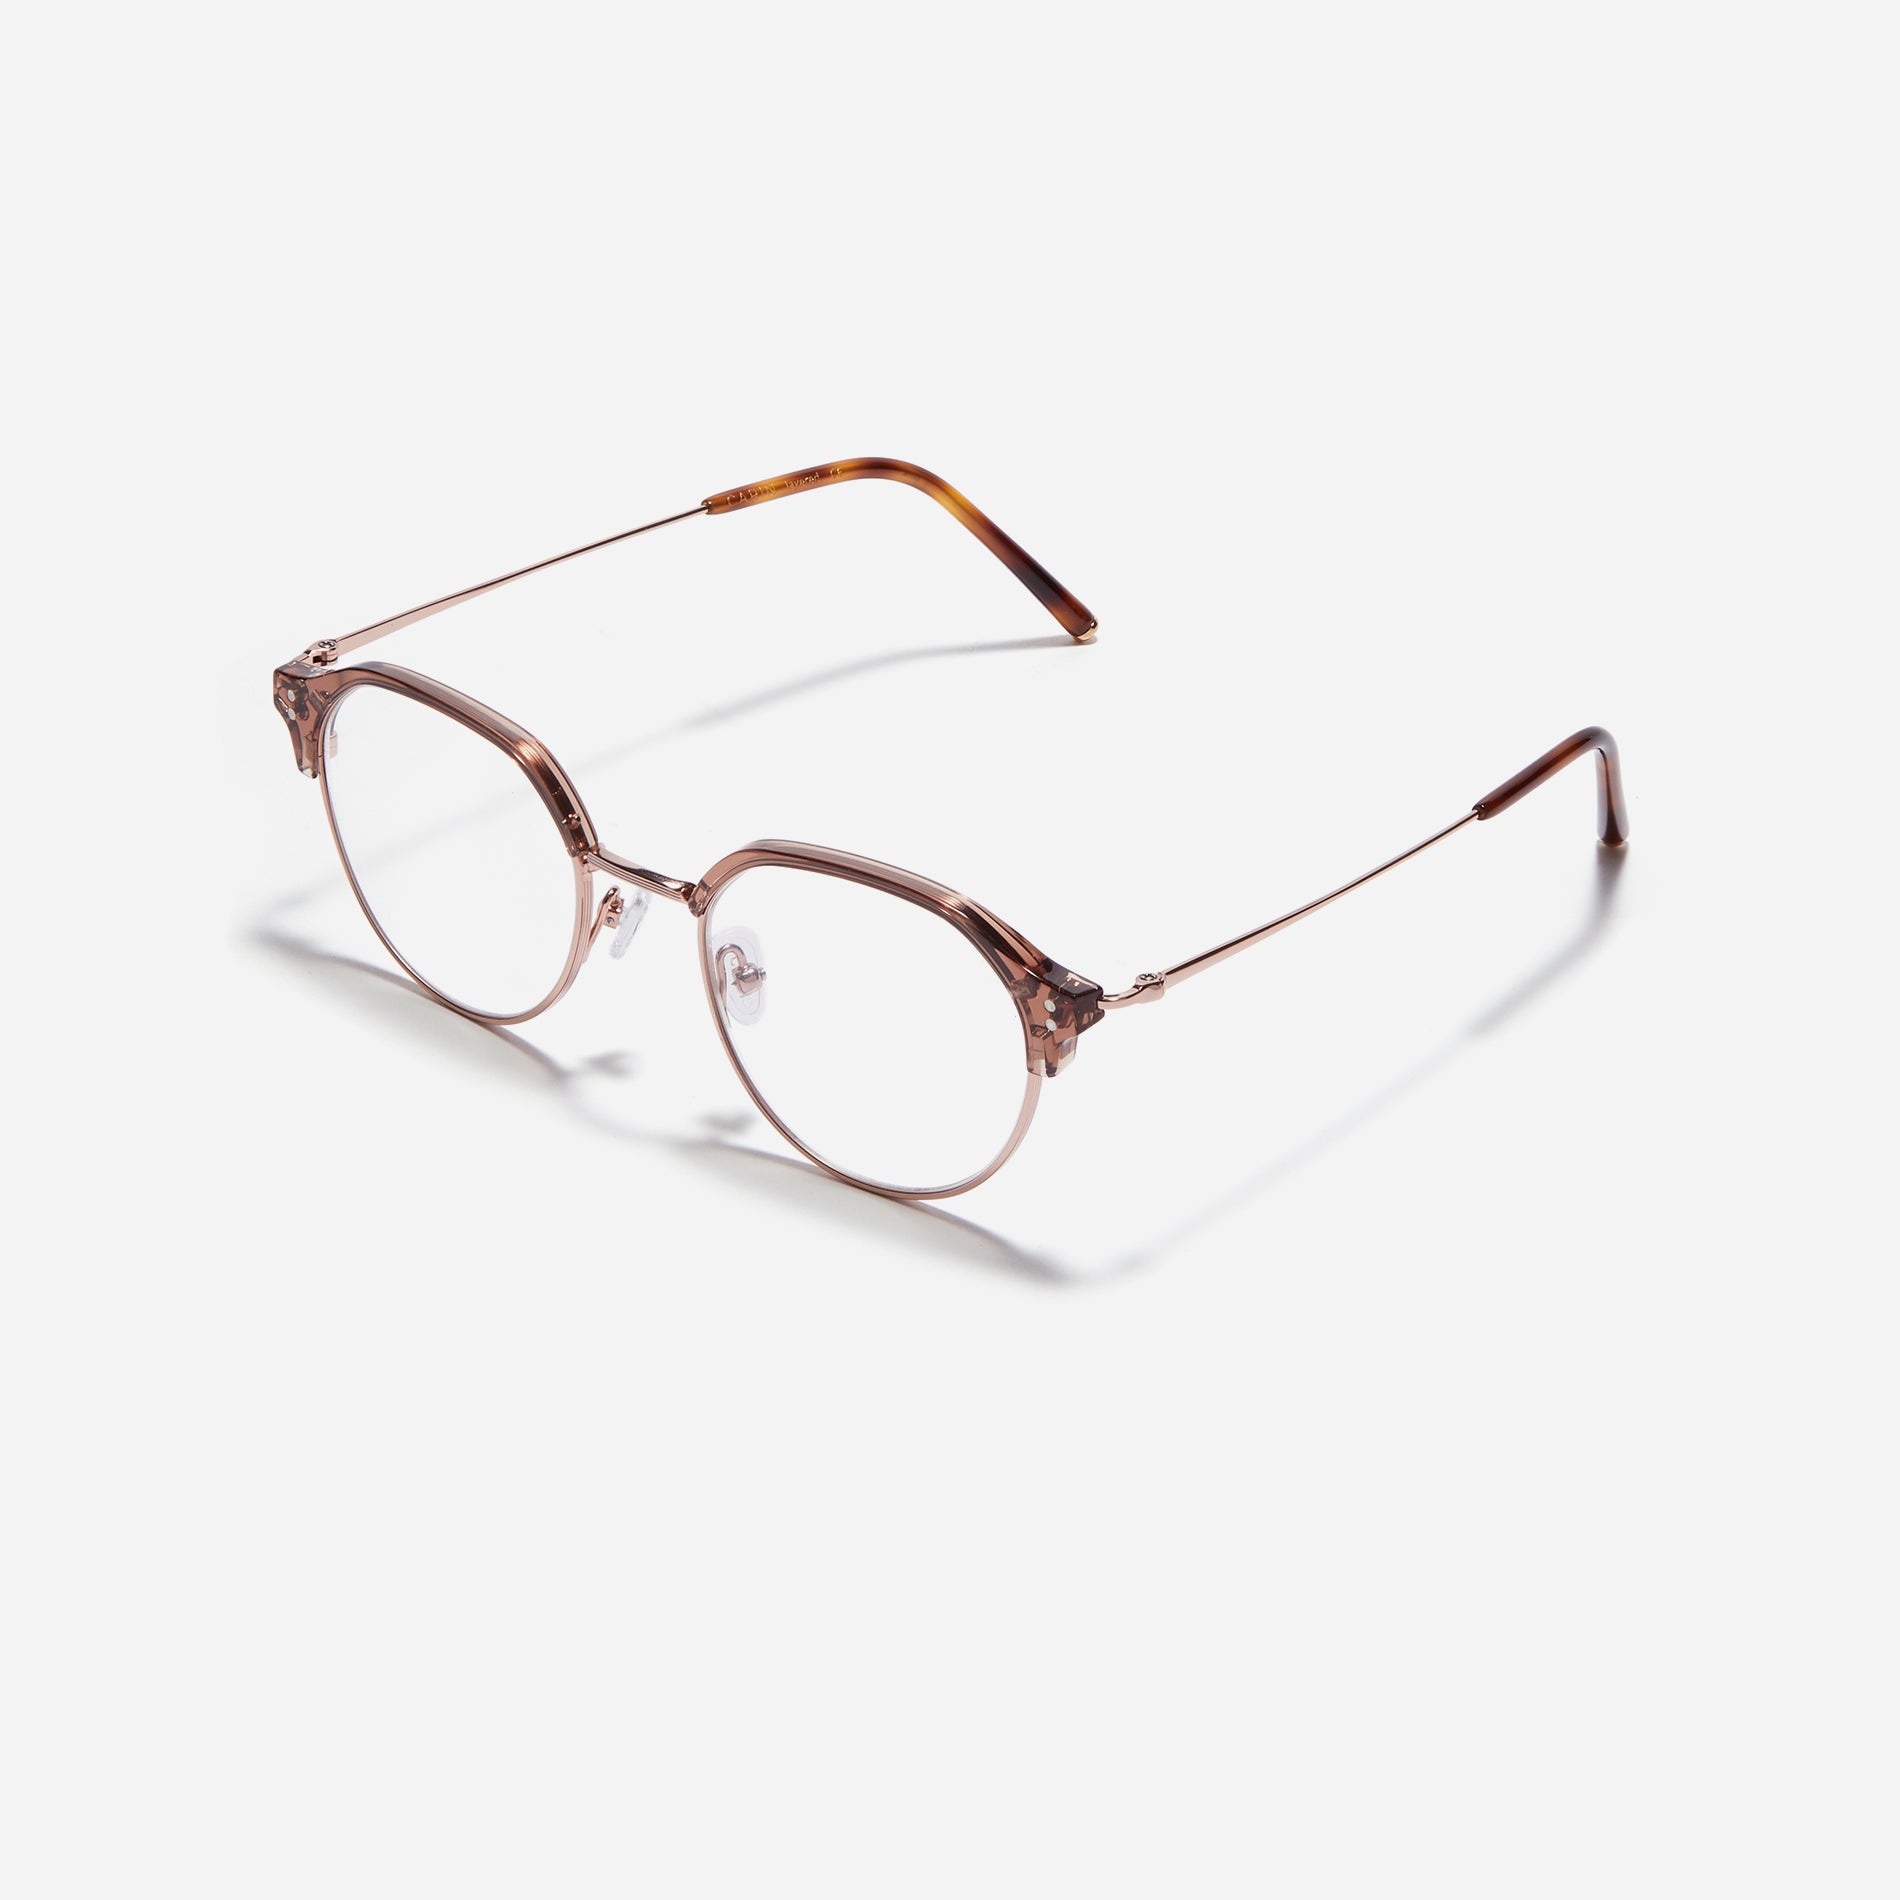 Polygonal-shaped gold-rimmed eyeglasses. The frame, constructed from bioplastic and titanium, seamlessly merges exceptional durability with an ultra-lightweight build, while stylish nose bridge lining details enhance the overall design. The B-titanium temples deliver a lightweight and comfortable fit, guaranteeing prolonged wear without any discomfort.